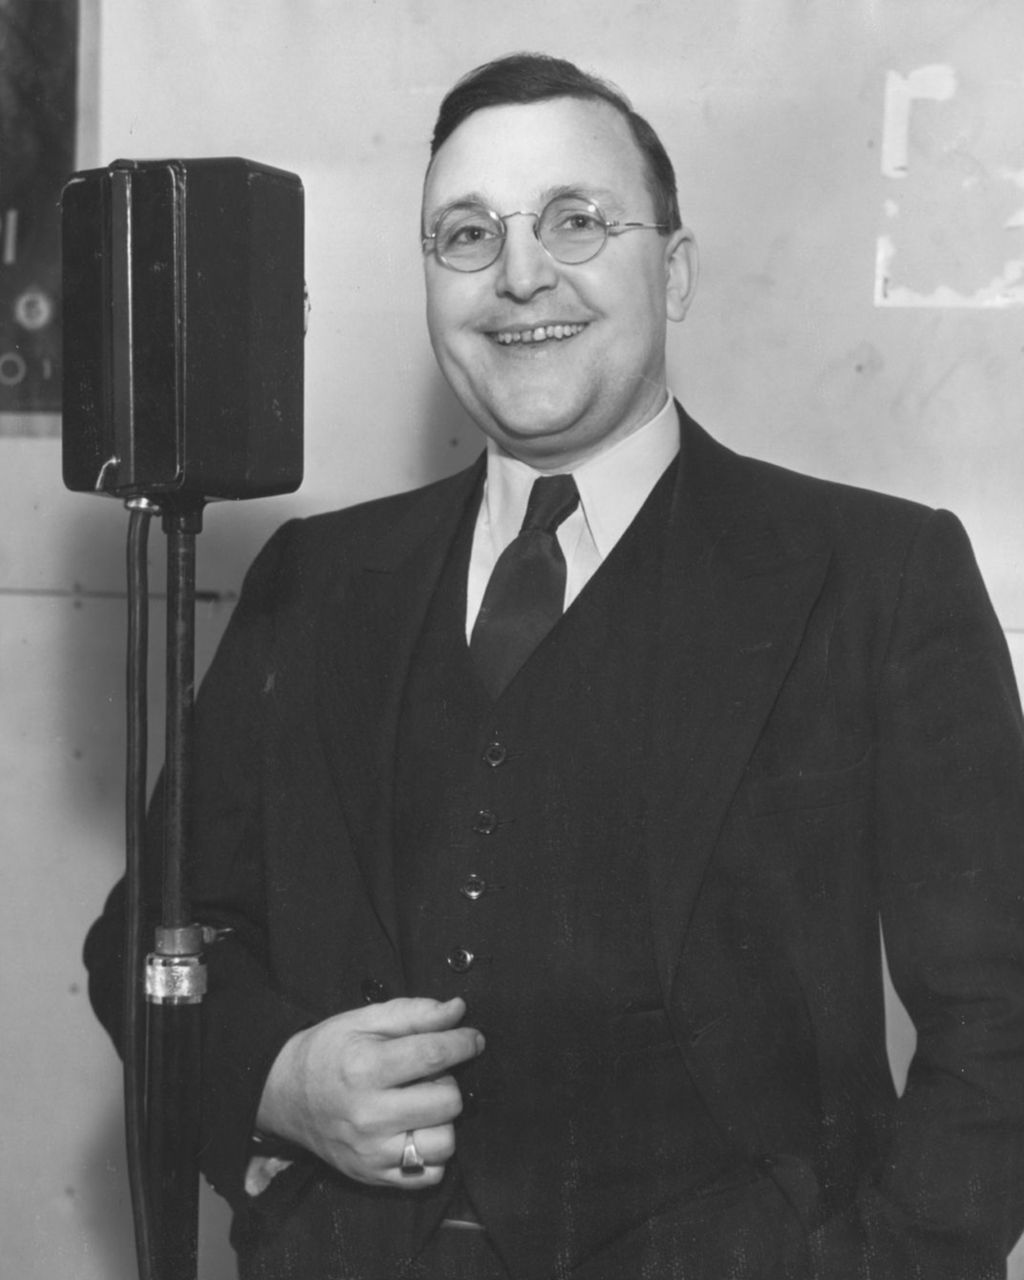 Tom Blanchard, famous radio whistler, placed first in a whistling contest